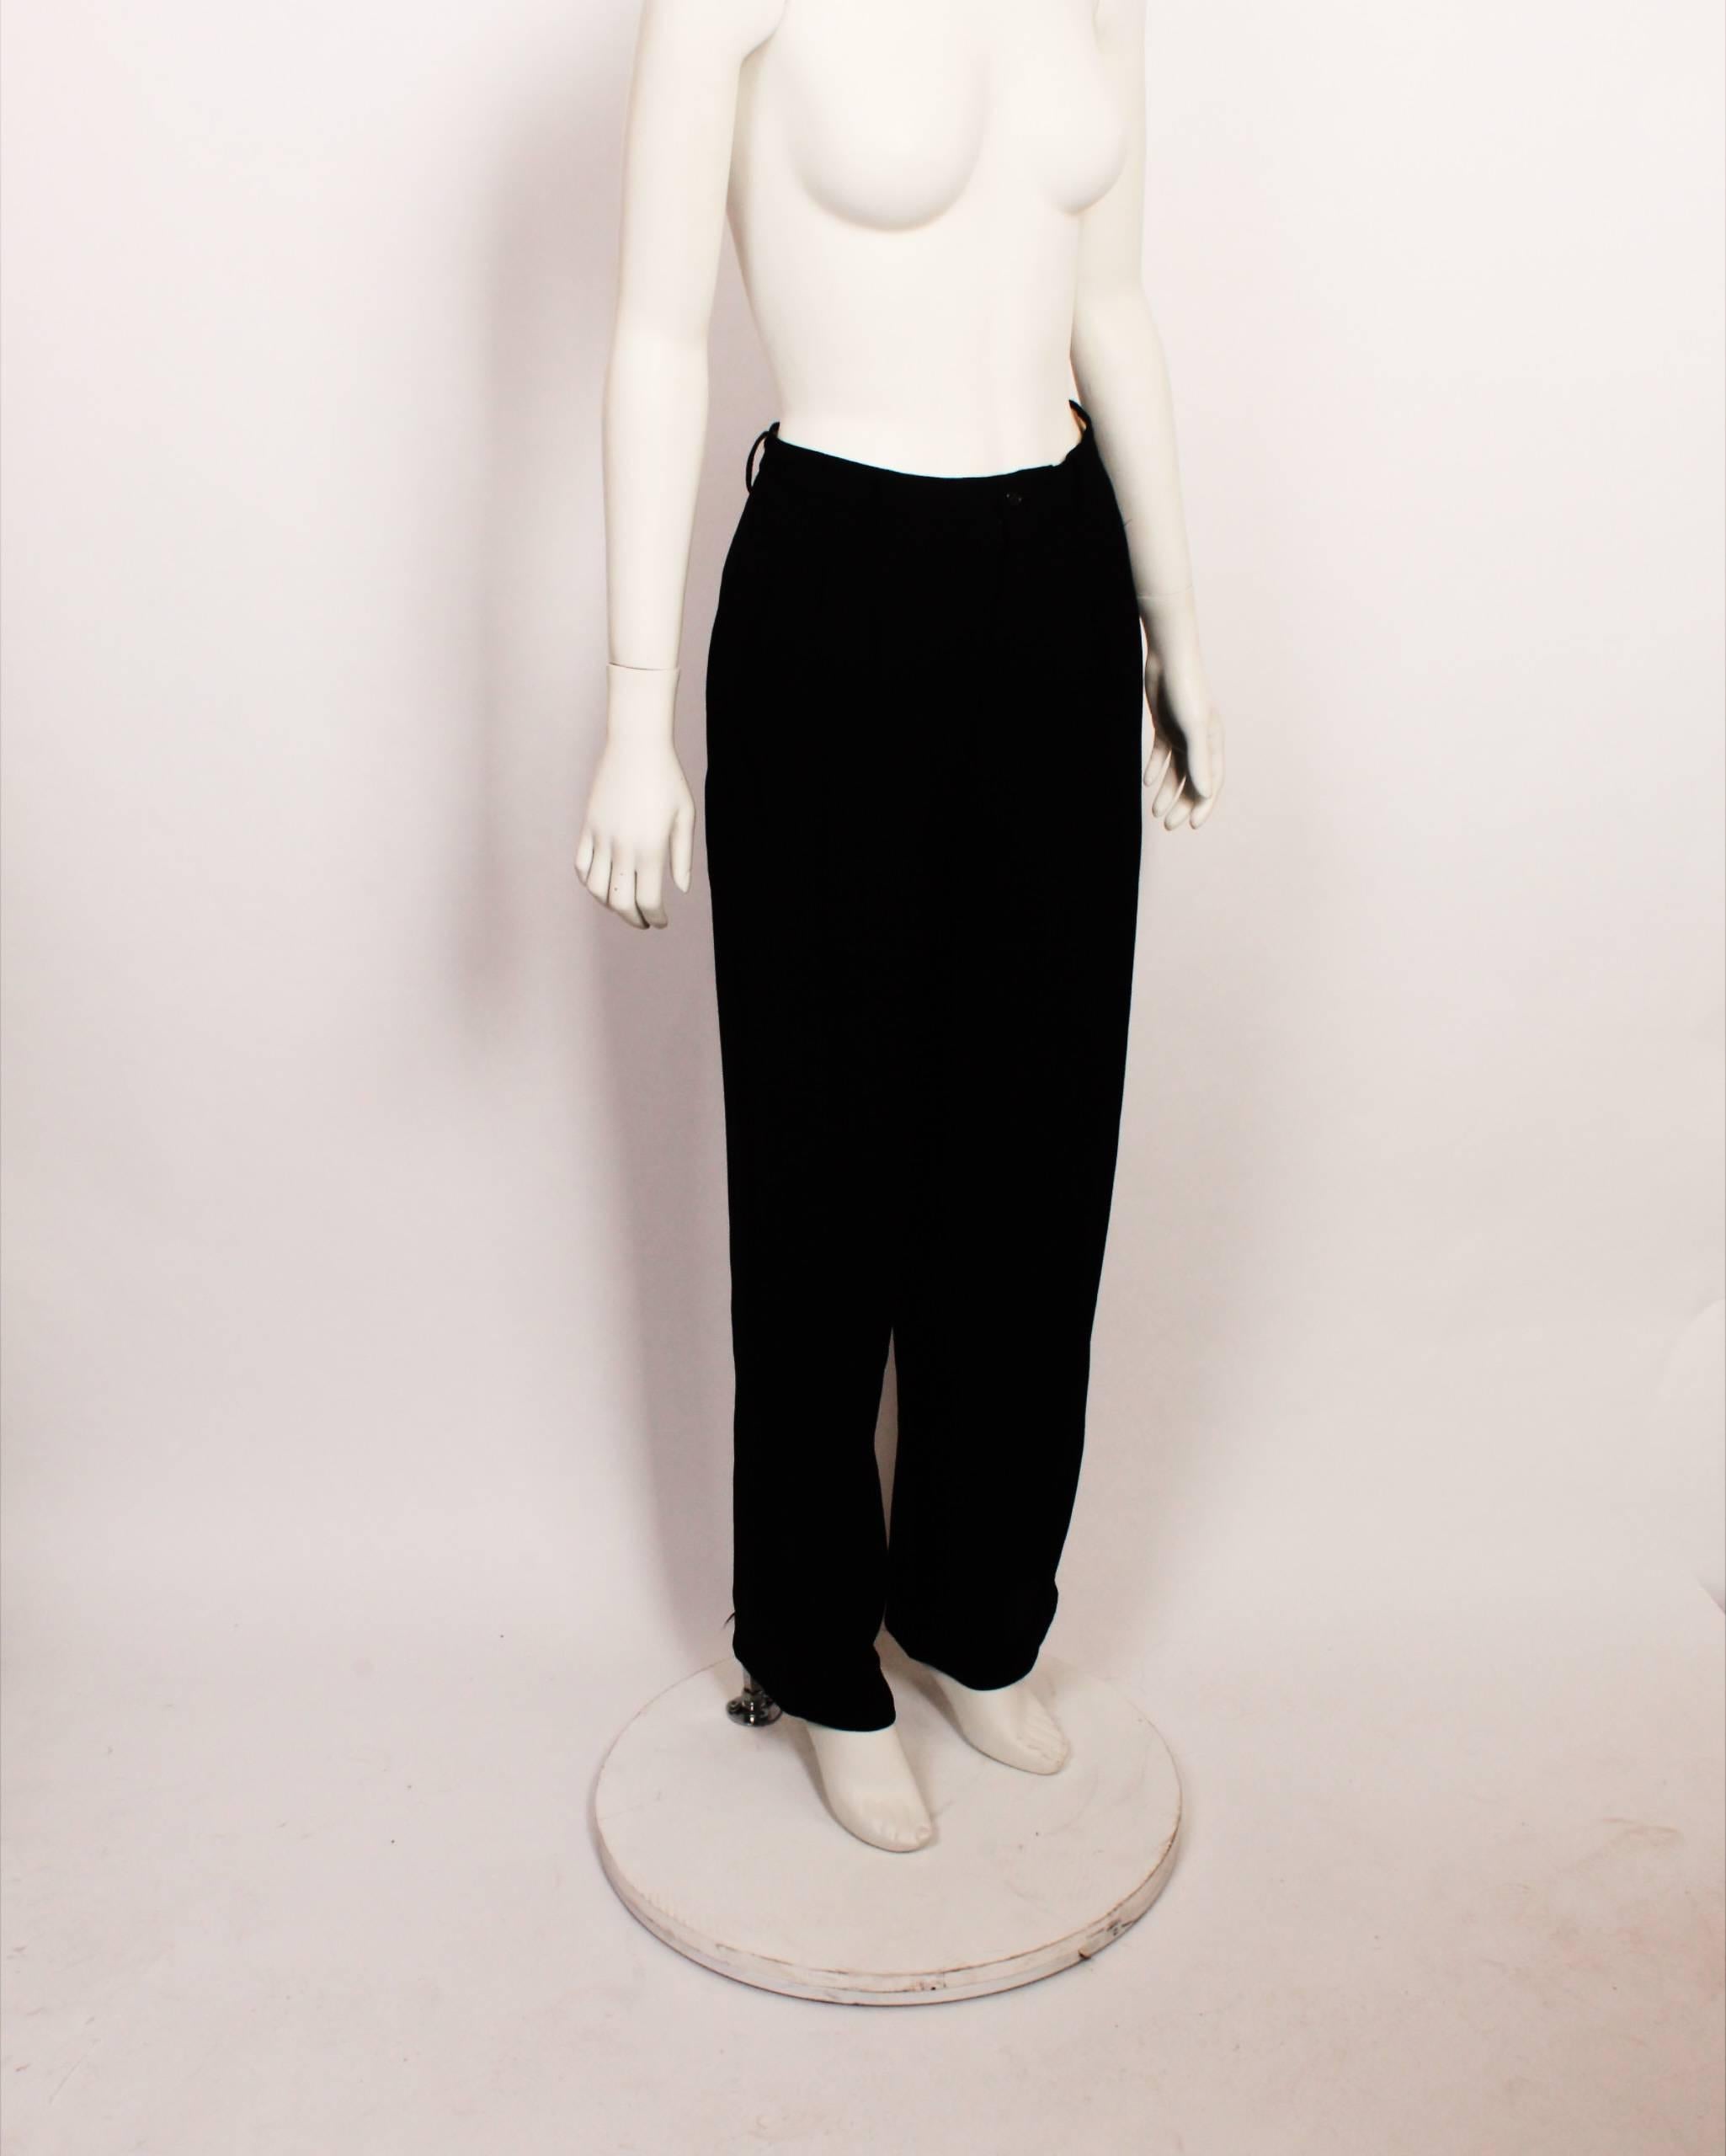 Issey Miyake Pants In Excellent Condition For Sale In Melbourne, Victoria